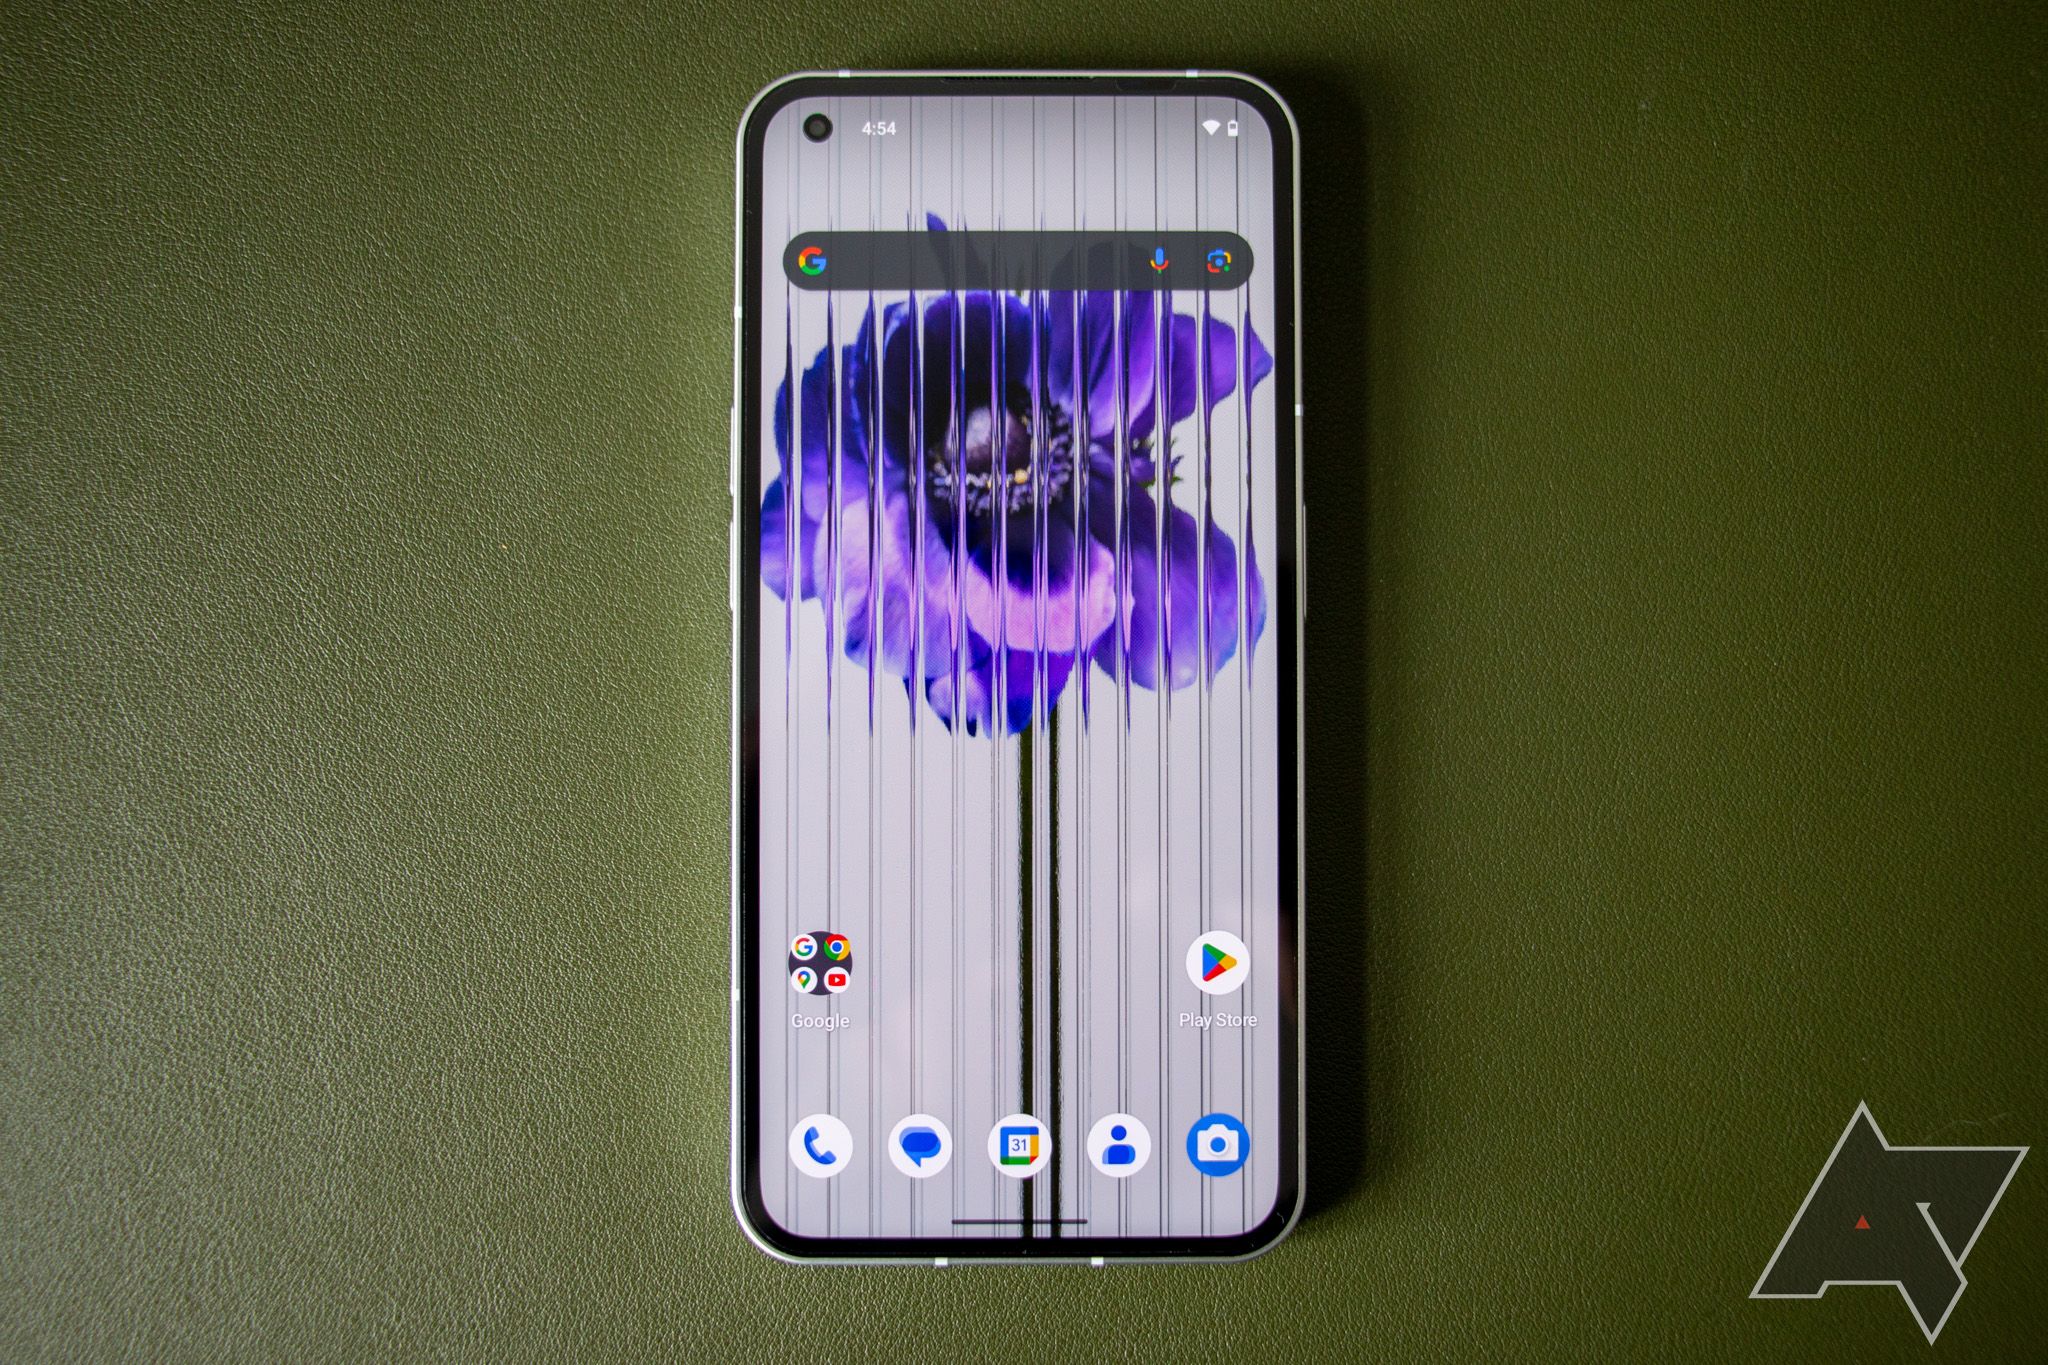 The Nothing Phone 1 lying on a green background with display turned on, showing the Android 14 beta launcher